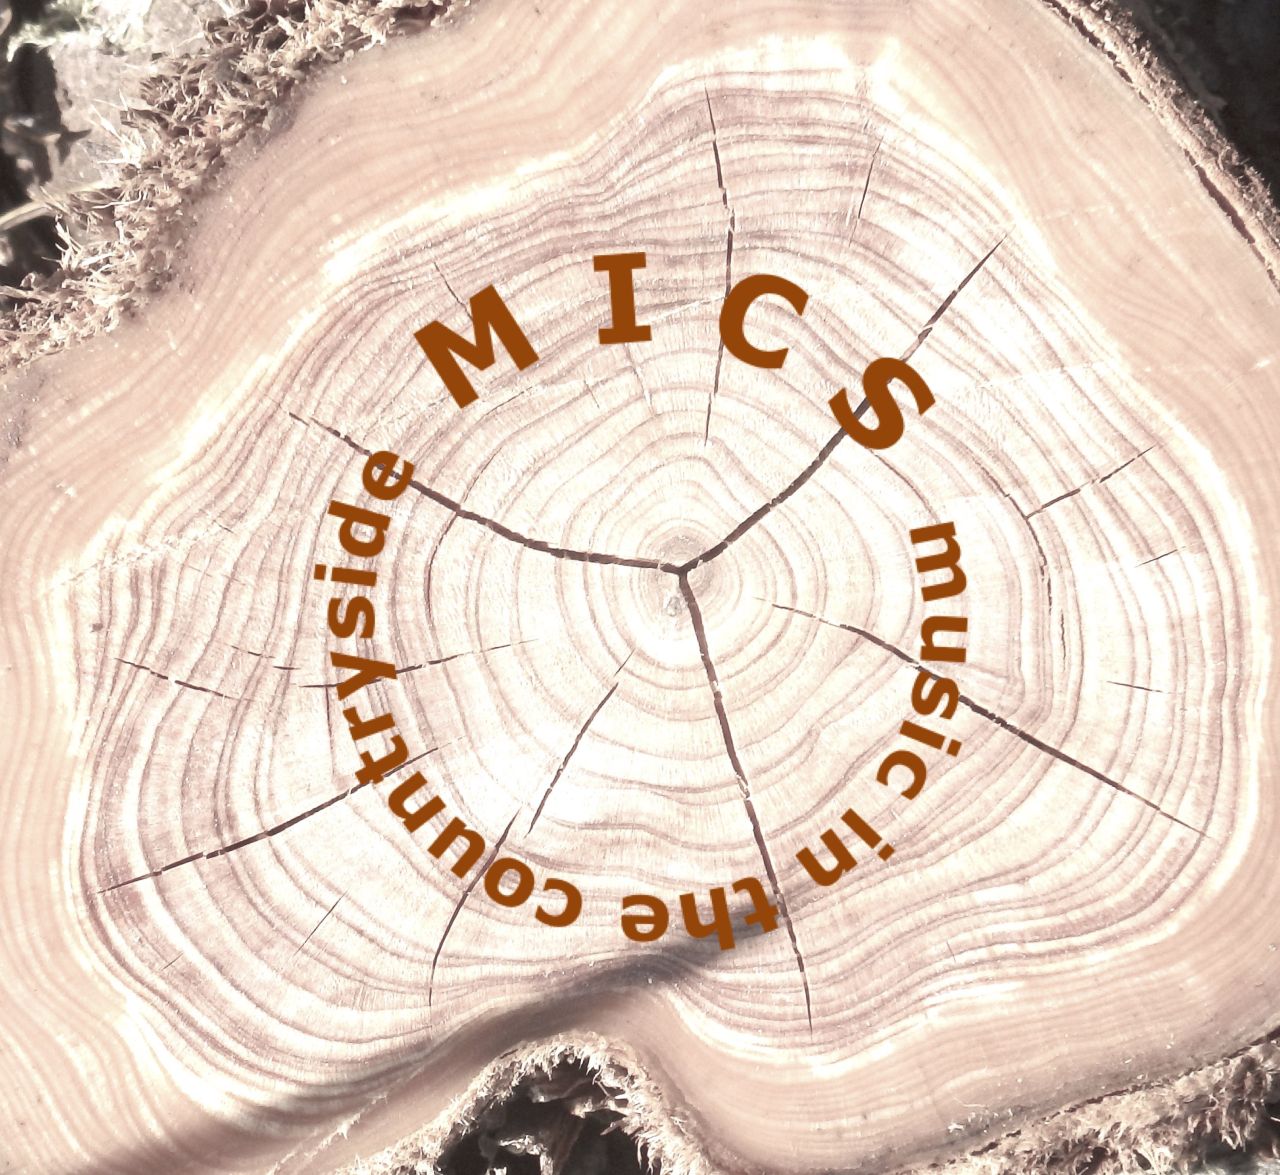 MICS – MUSIC IN THE COUNTRYSIDE